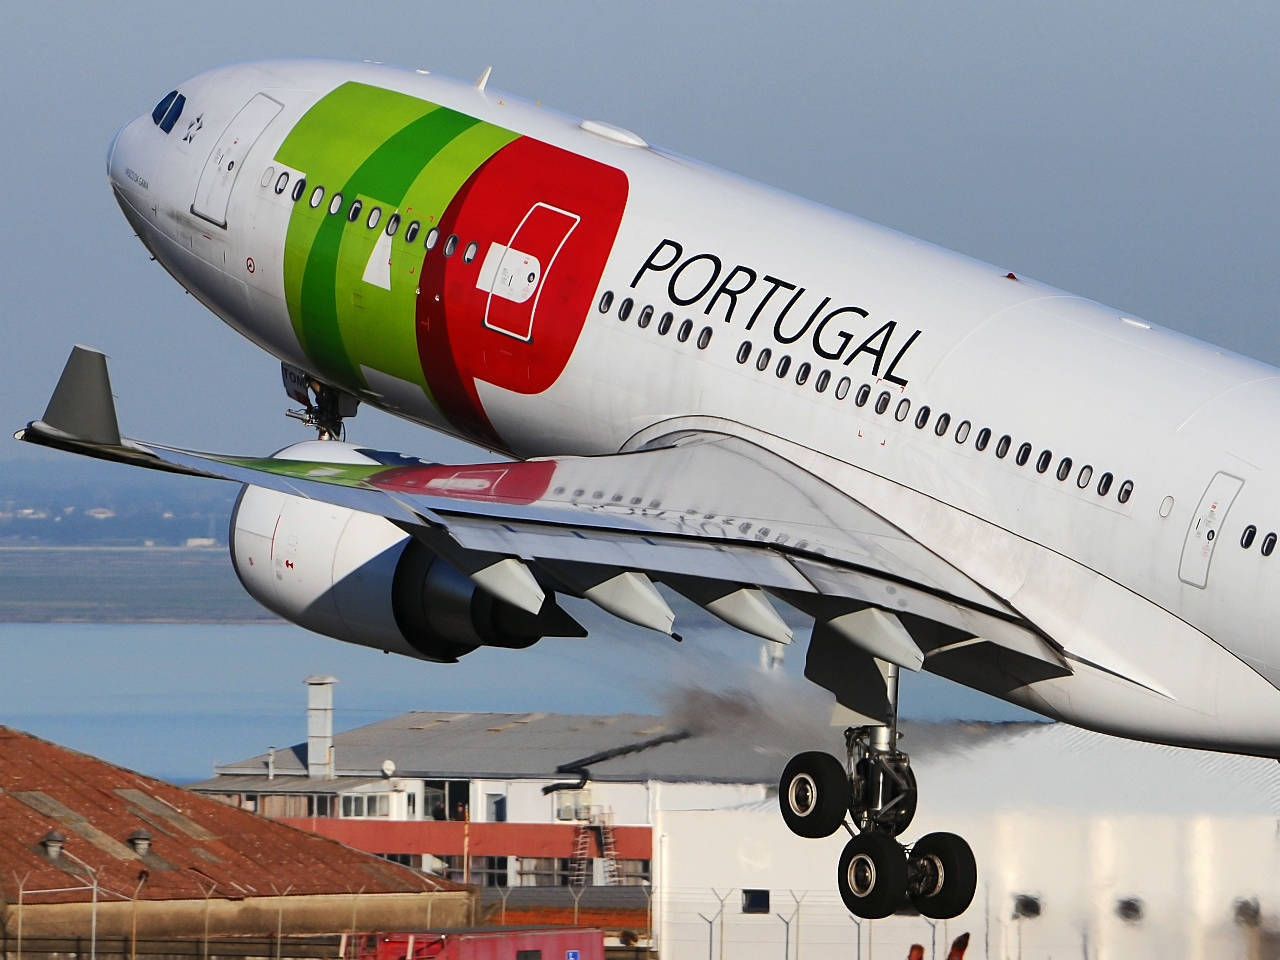 Tapportugal Flugzeug Hebt Ab Wallpaper